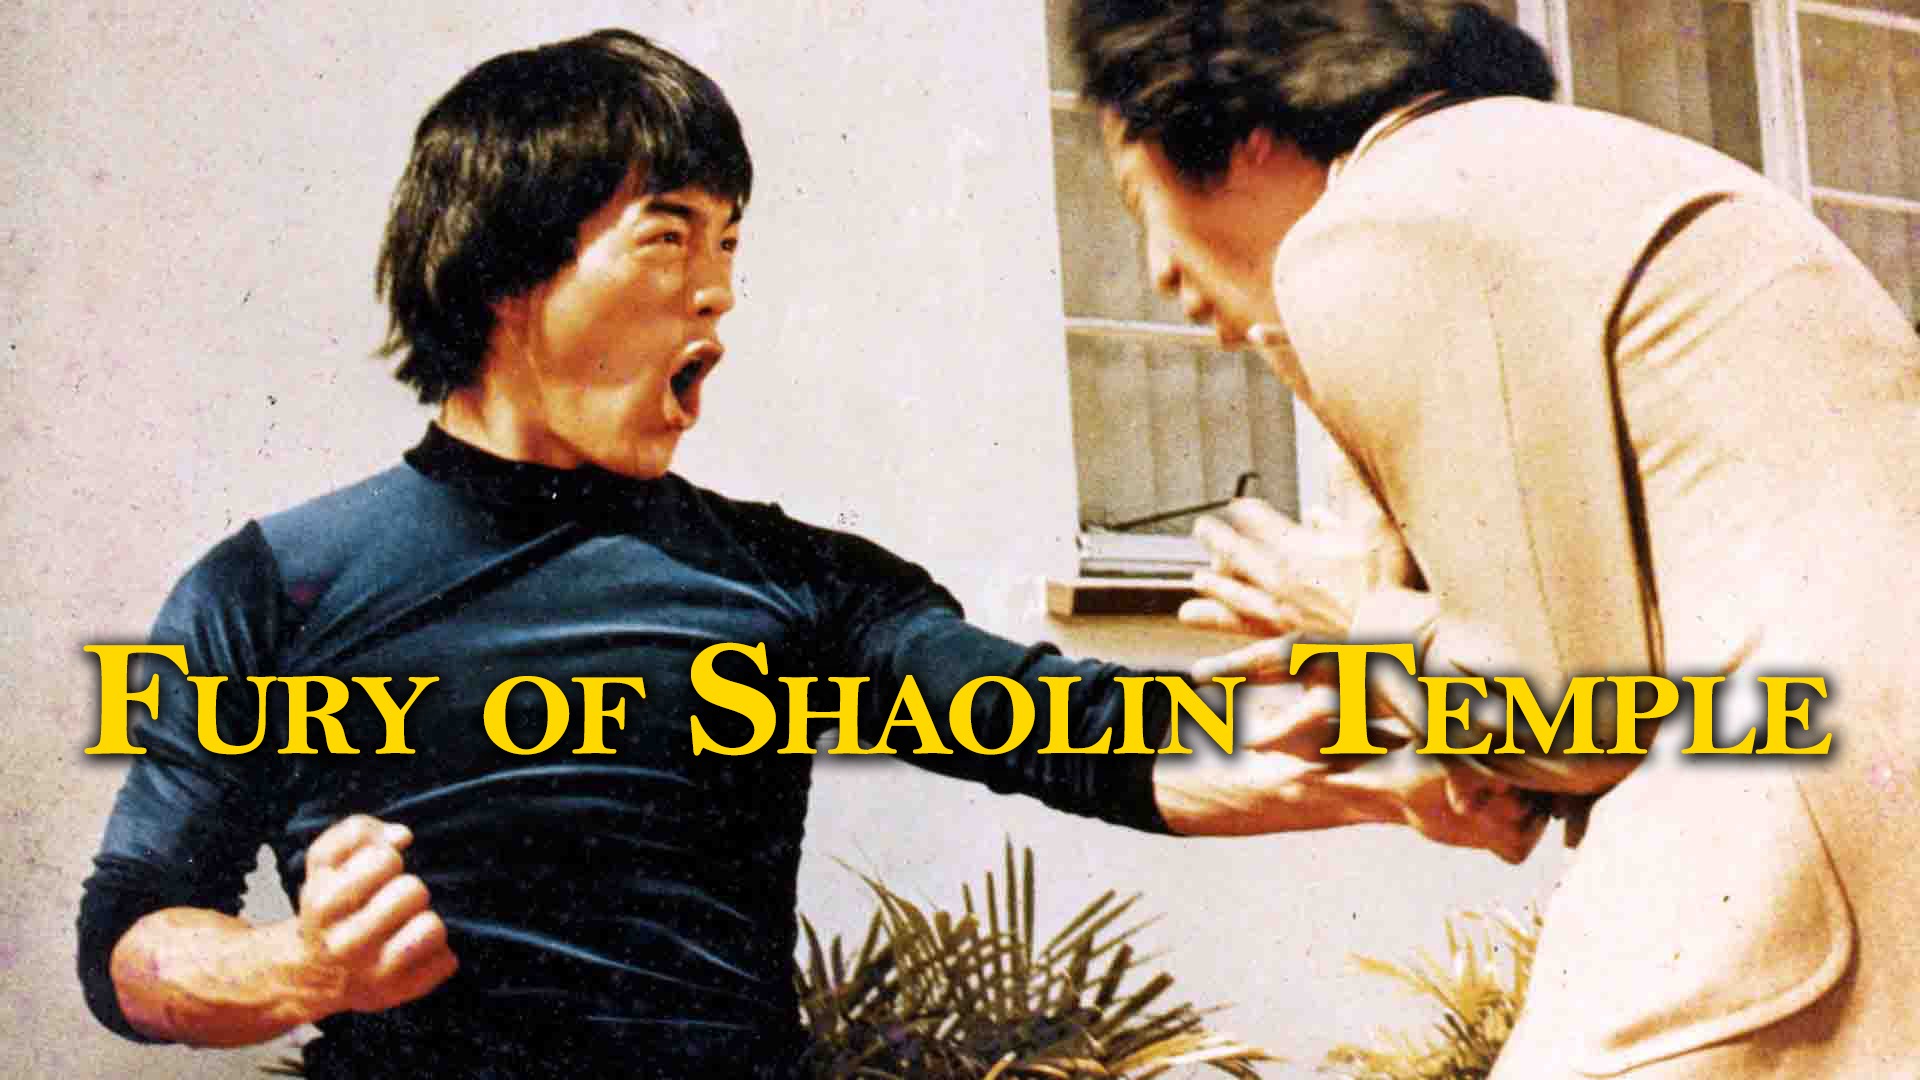 Fury of Shaolin Temple Poster